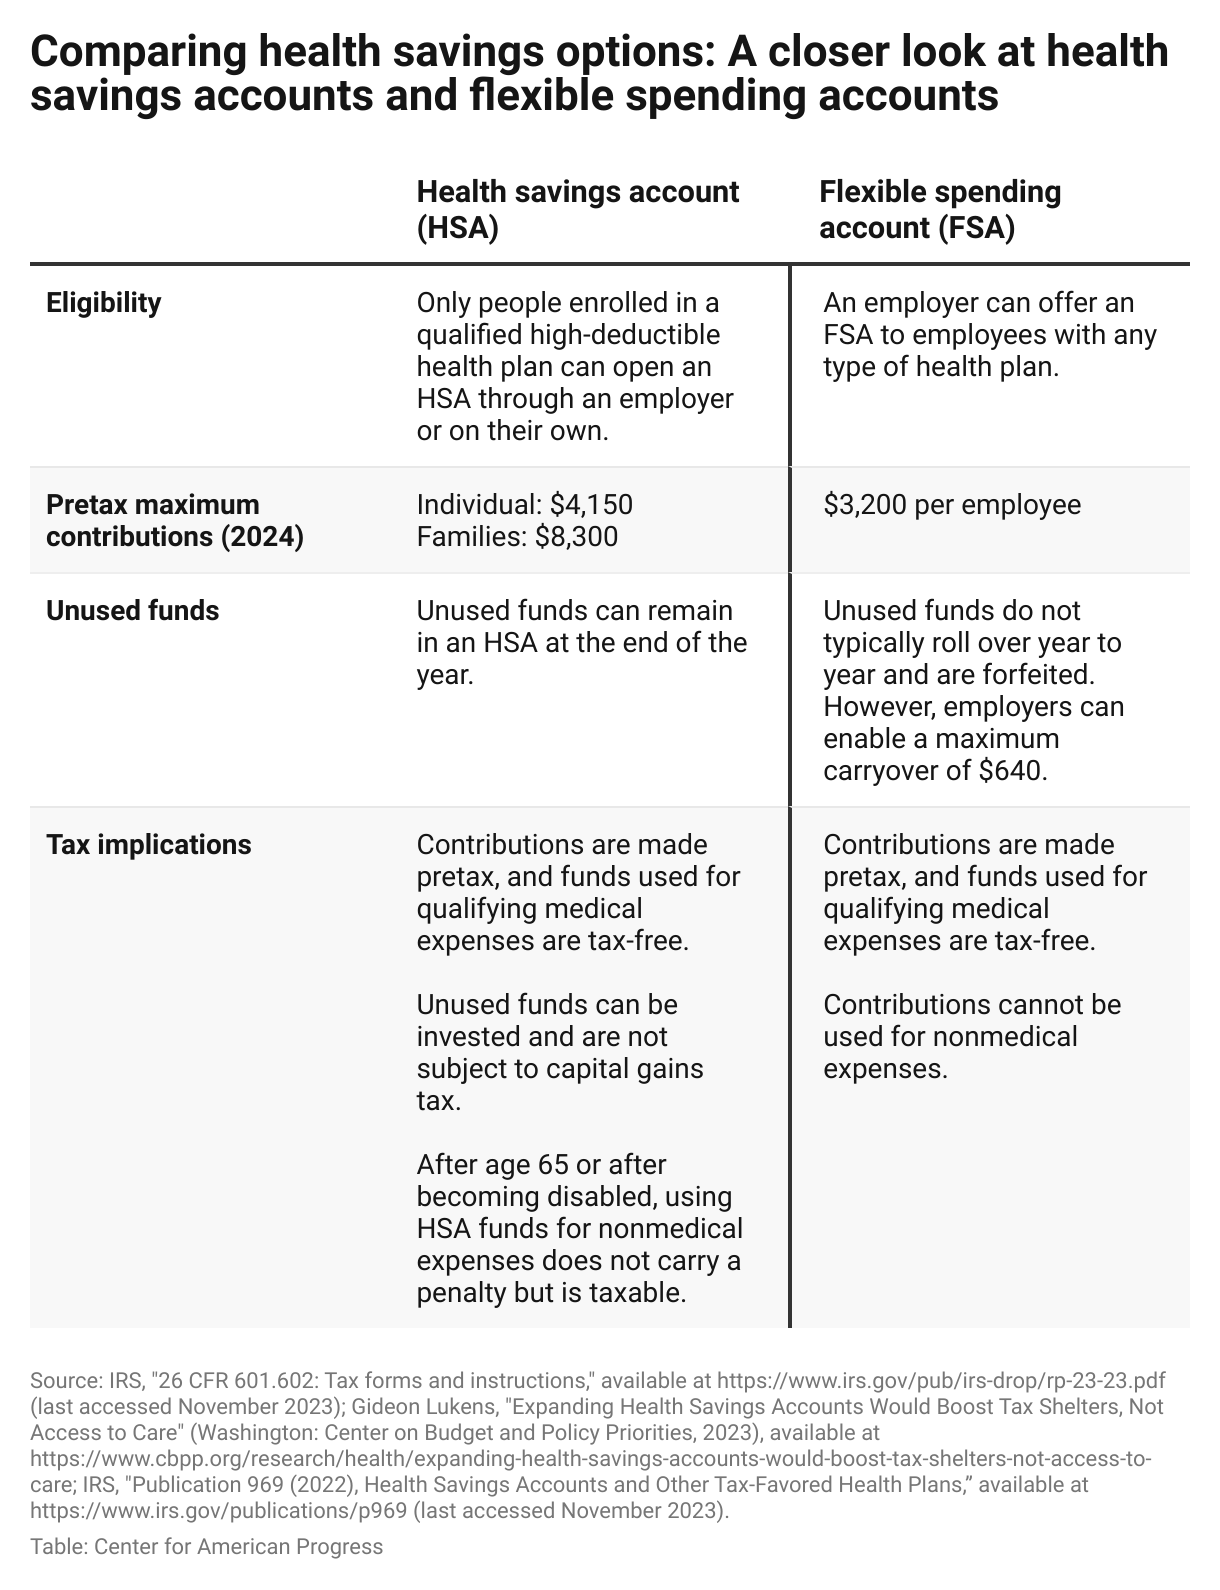 Table comparing savings options between a Health savings account (HSA) and Flexible spending account (FSA). 